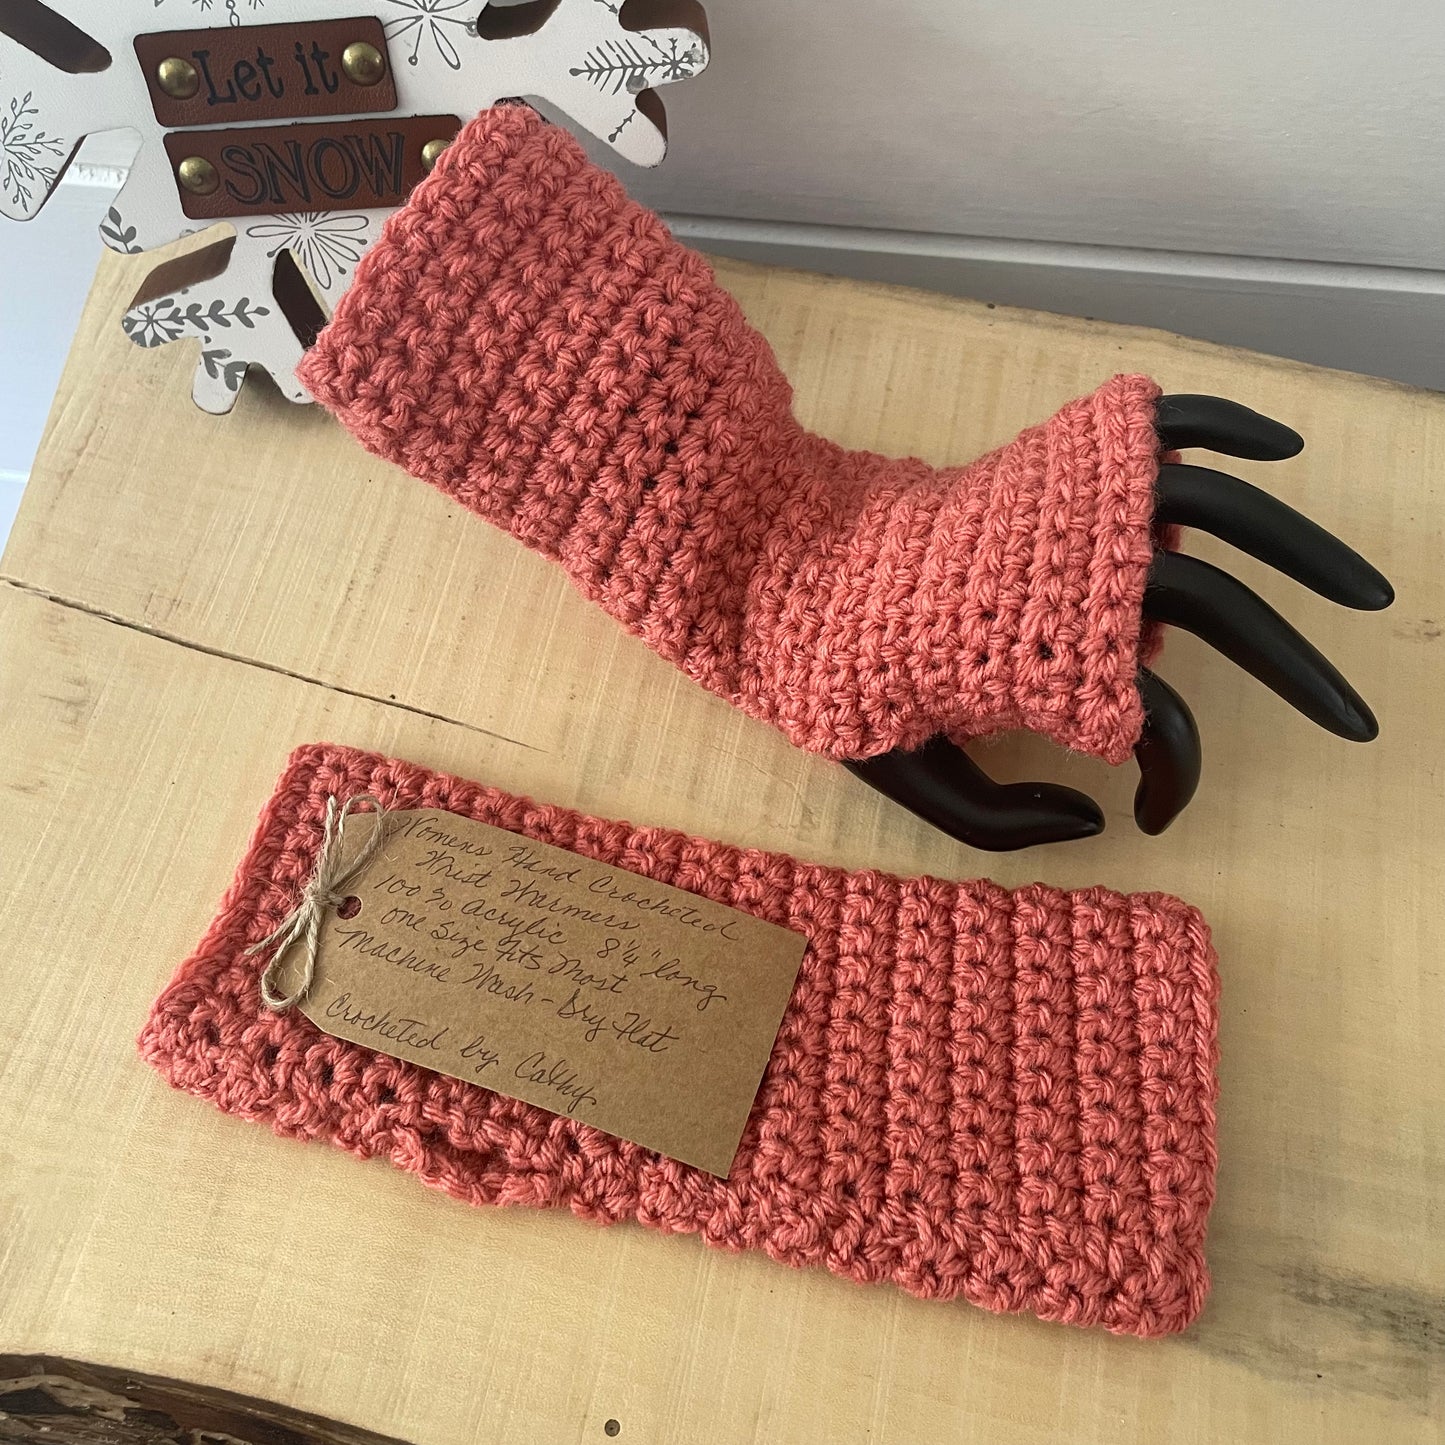 Salmon Texting Fingerless Gloves Crochet Knit Fall Winter Gaming Tech Wrist Warmers Outdoor Coral Peach